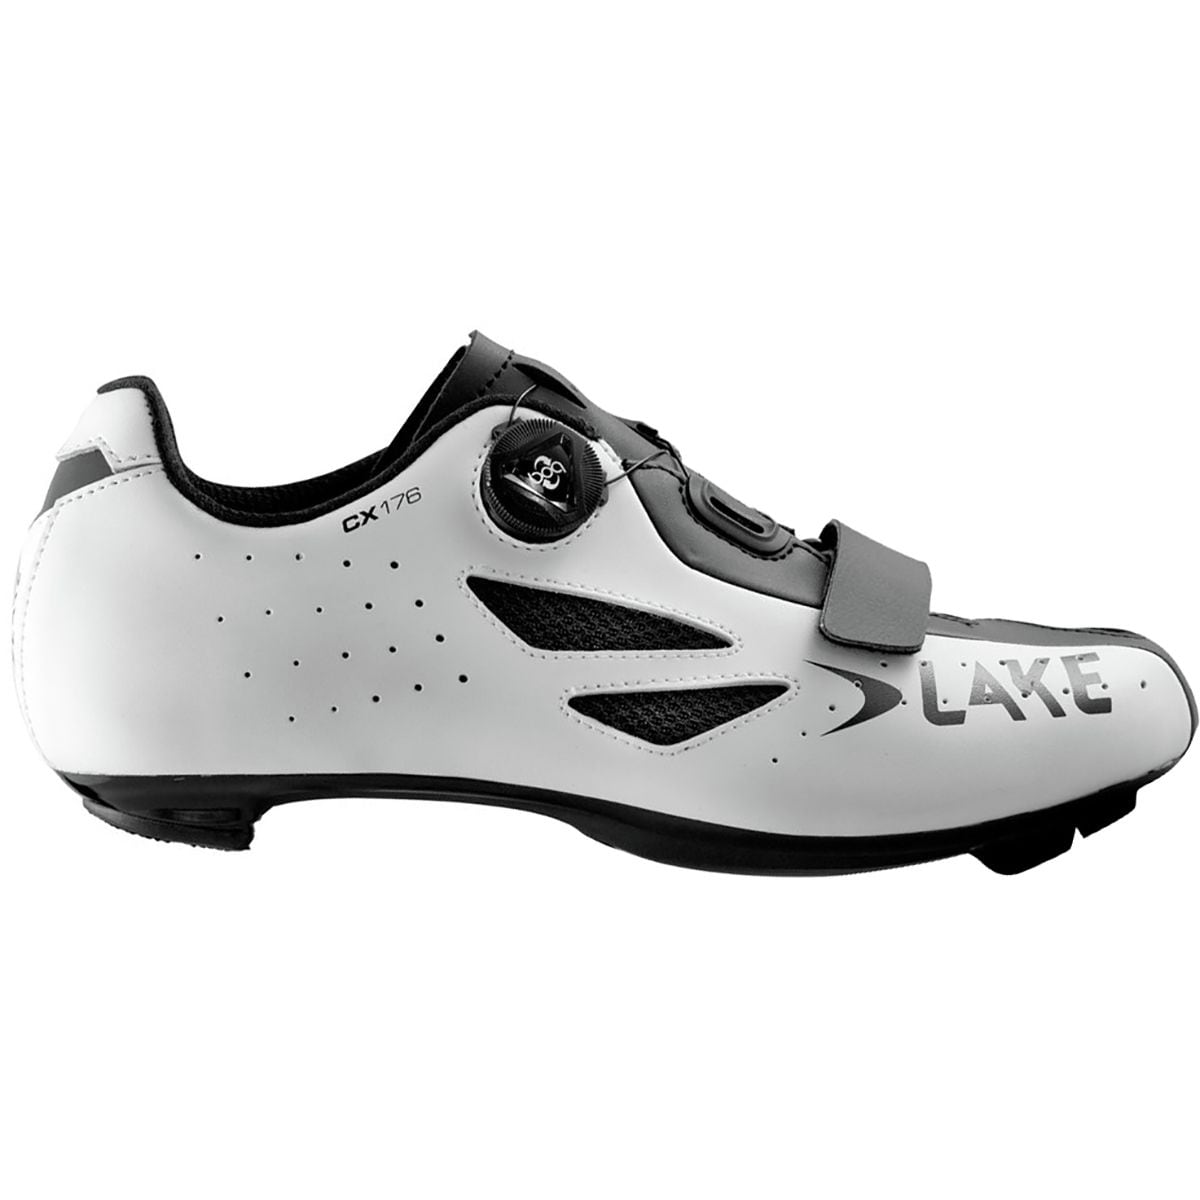 Details about   LAKE CX176 Black Grey ROAD CYCLING SHOES NEW 